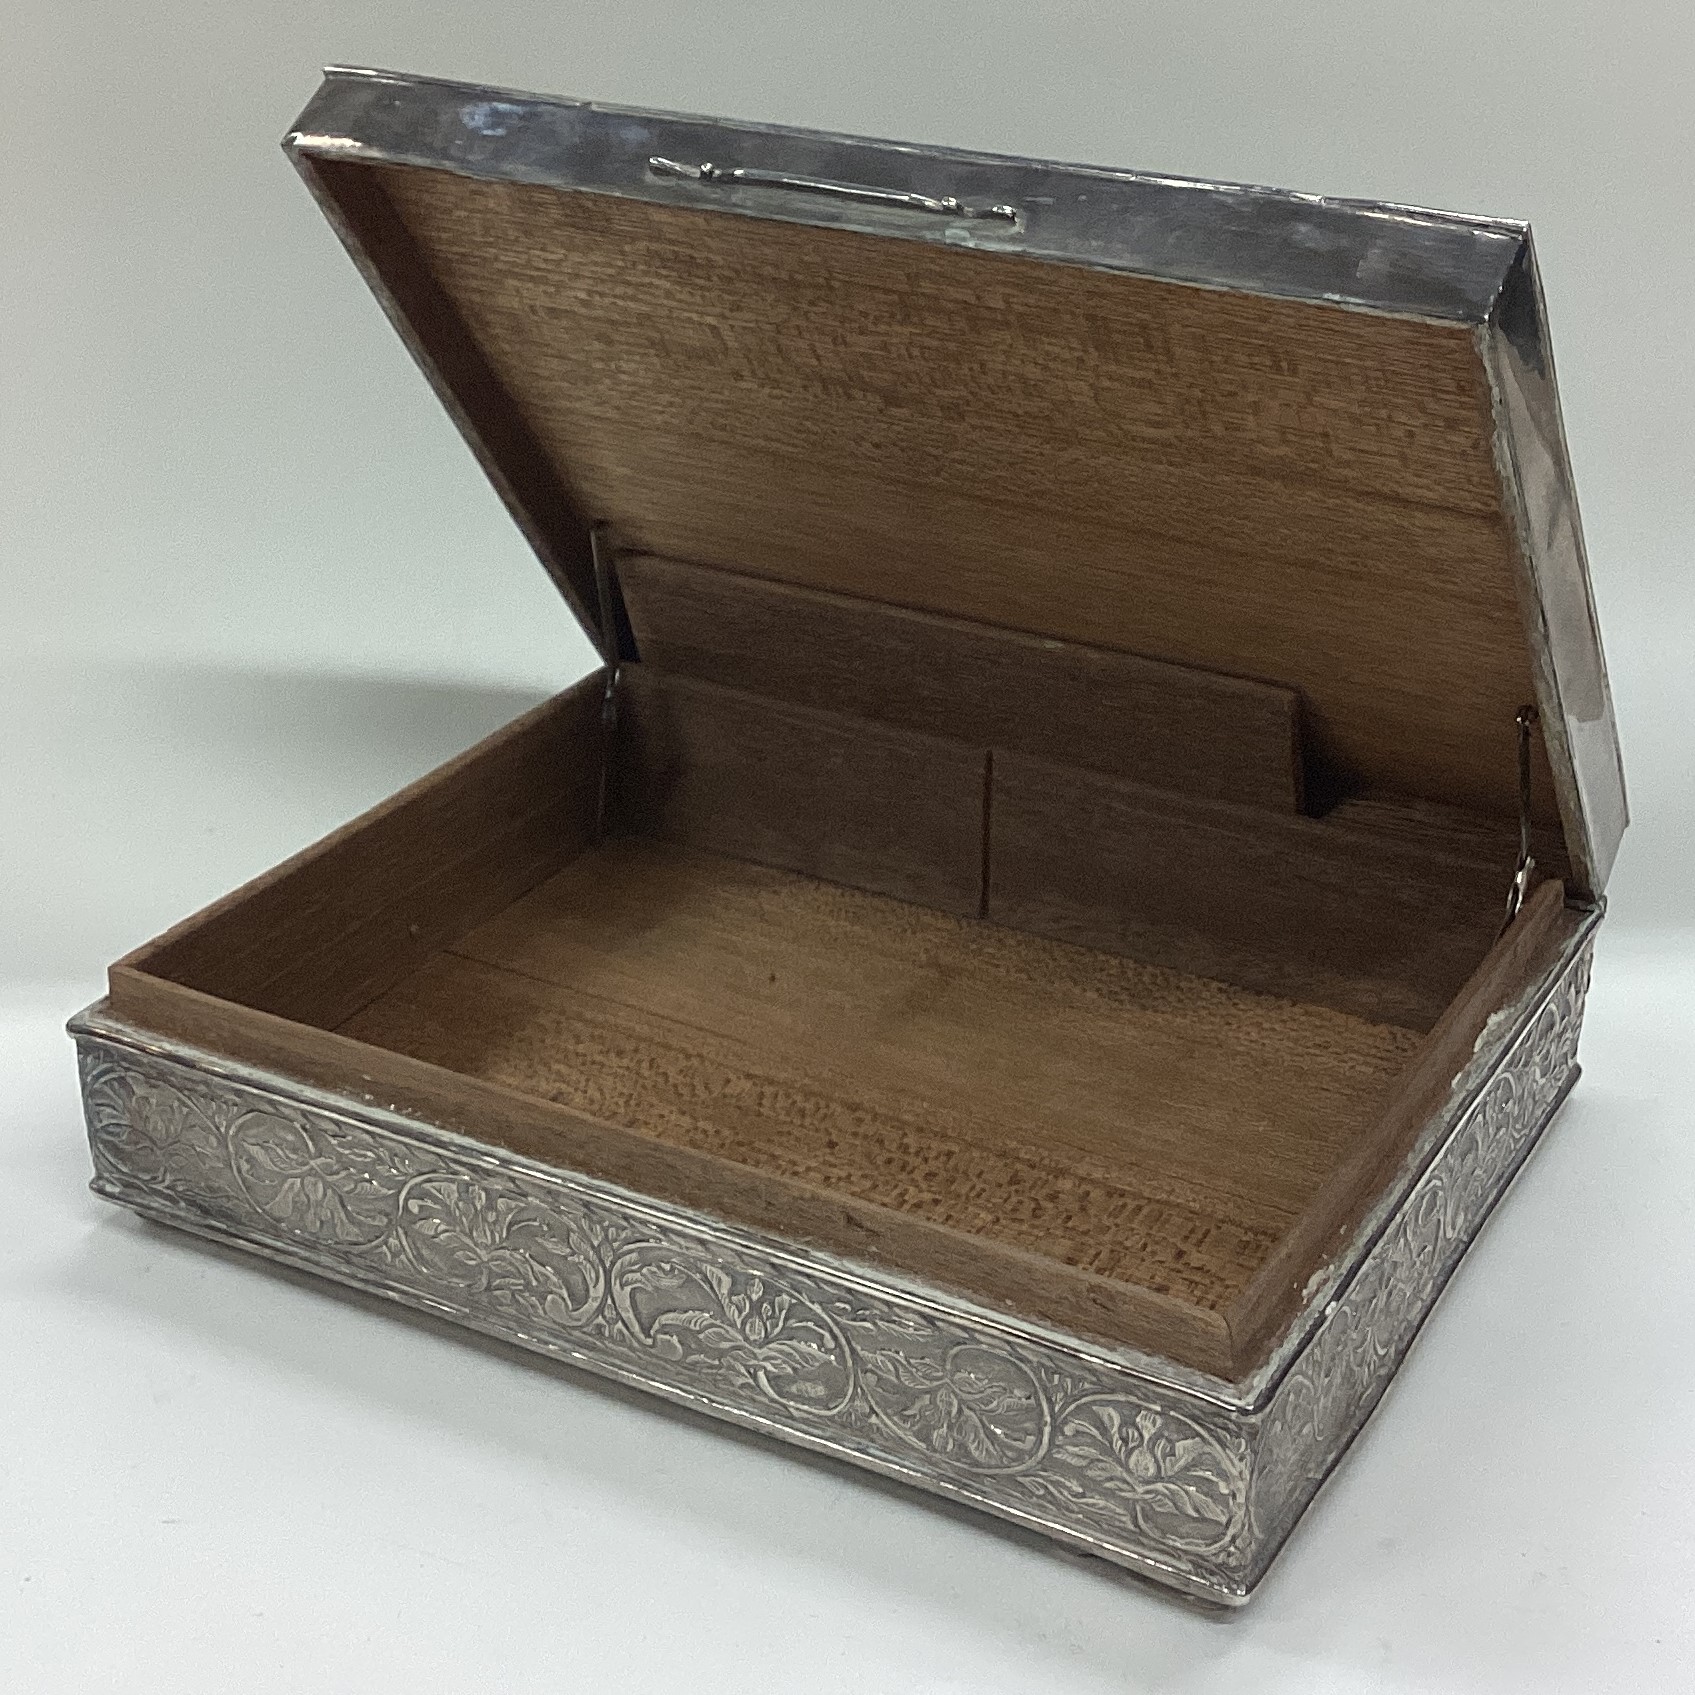 A Persian silver cigar box chased with Malaysian states. - Image 4 of 4